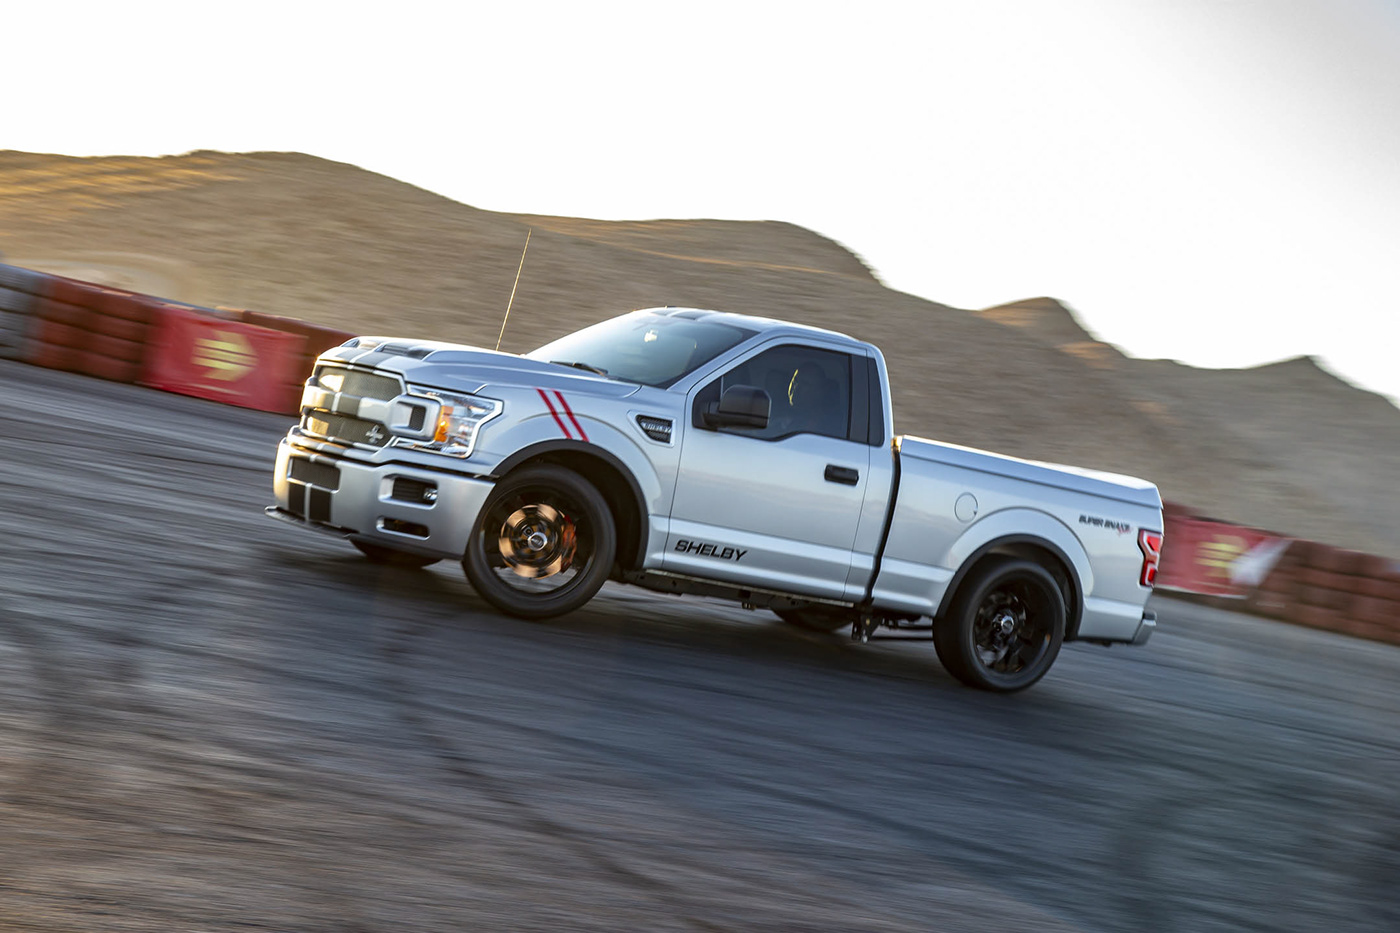 F-150 Ford shelby Shelby American Shelby F-150 Shelby F-150 Super Super Snake Sport